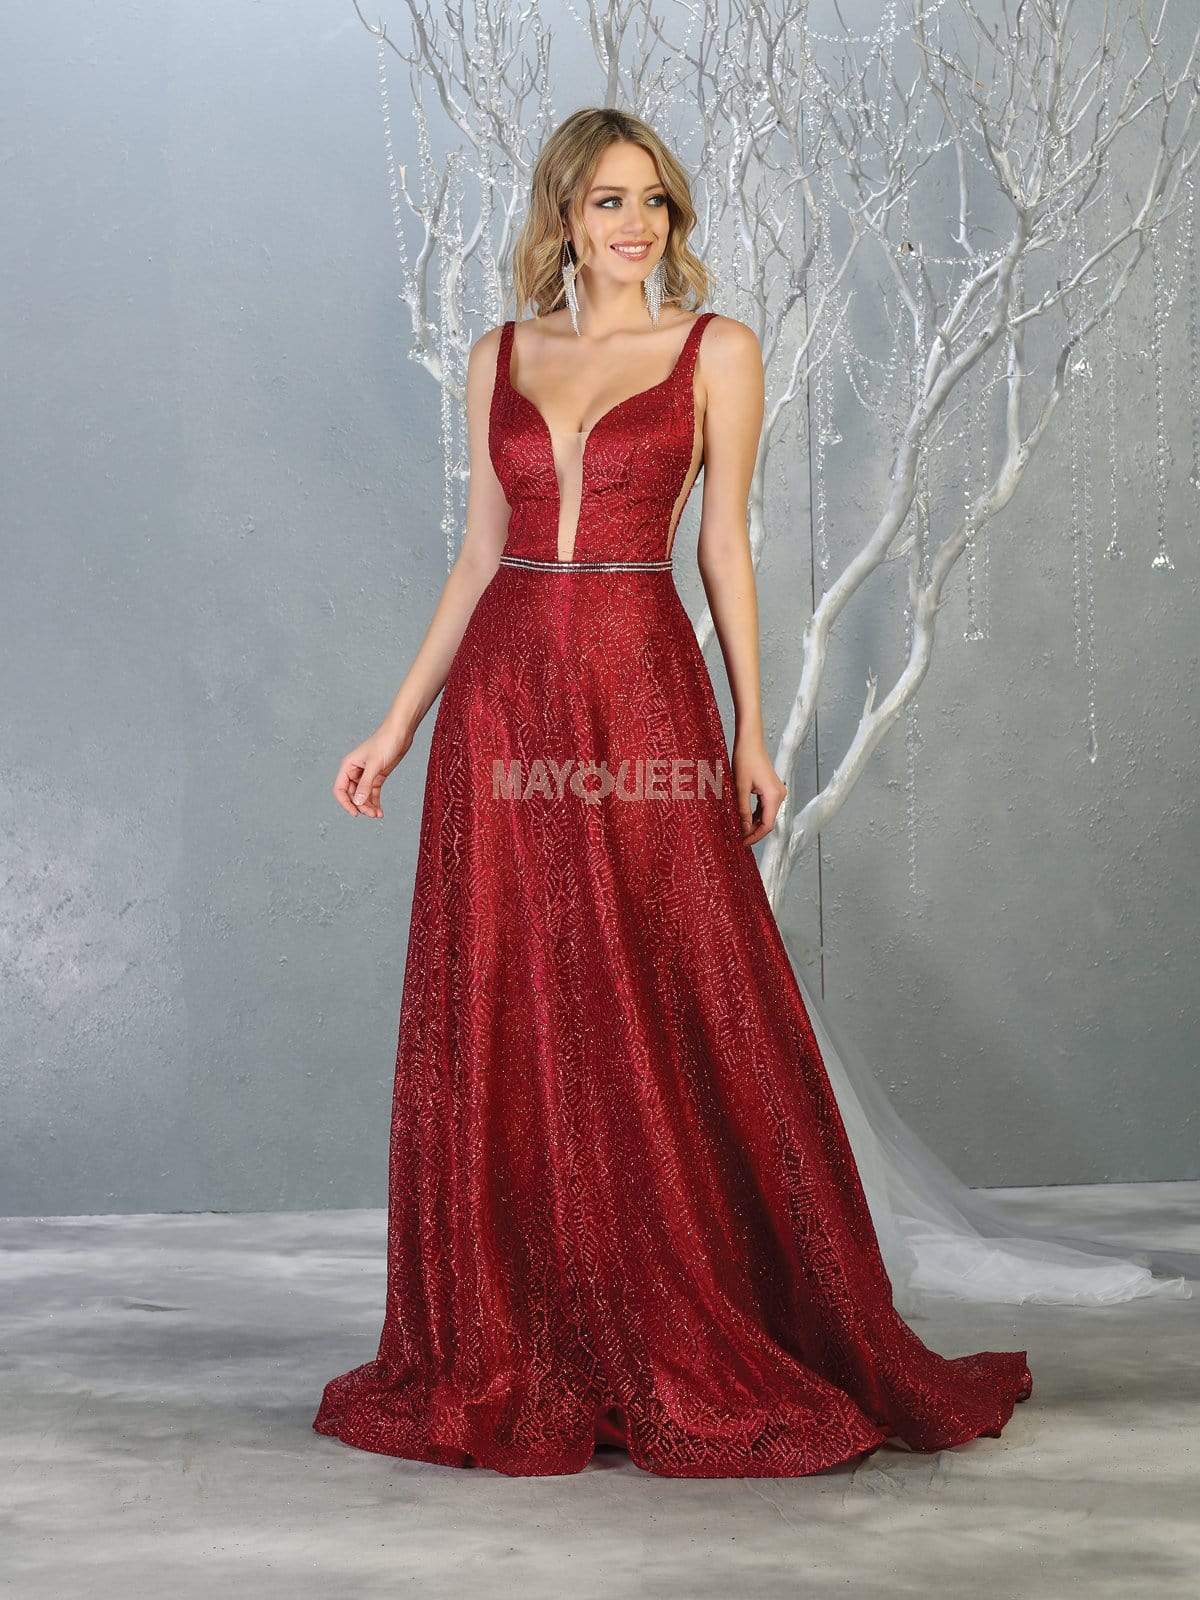 May Queen - MQ1771 Glitter Embellished Plunging Sweetheart Dress Prom Dresses